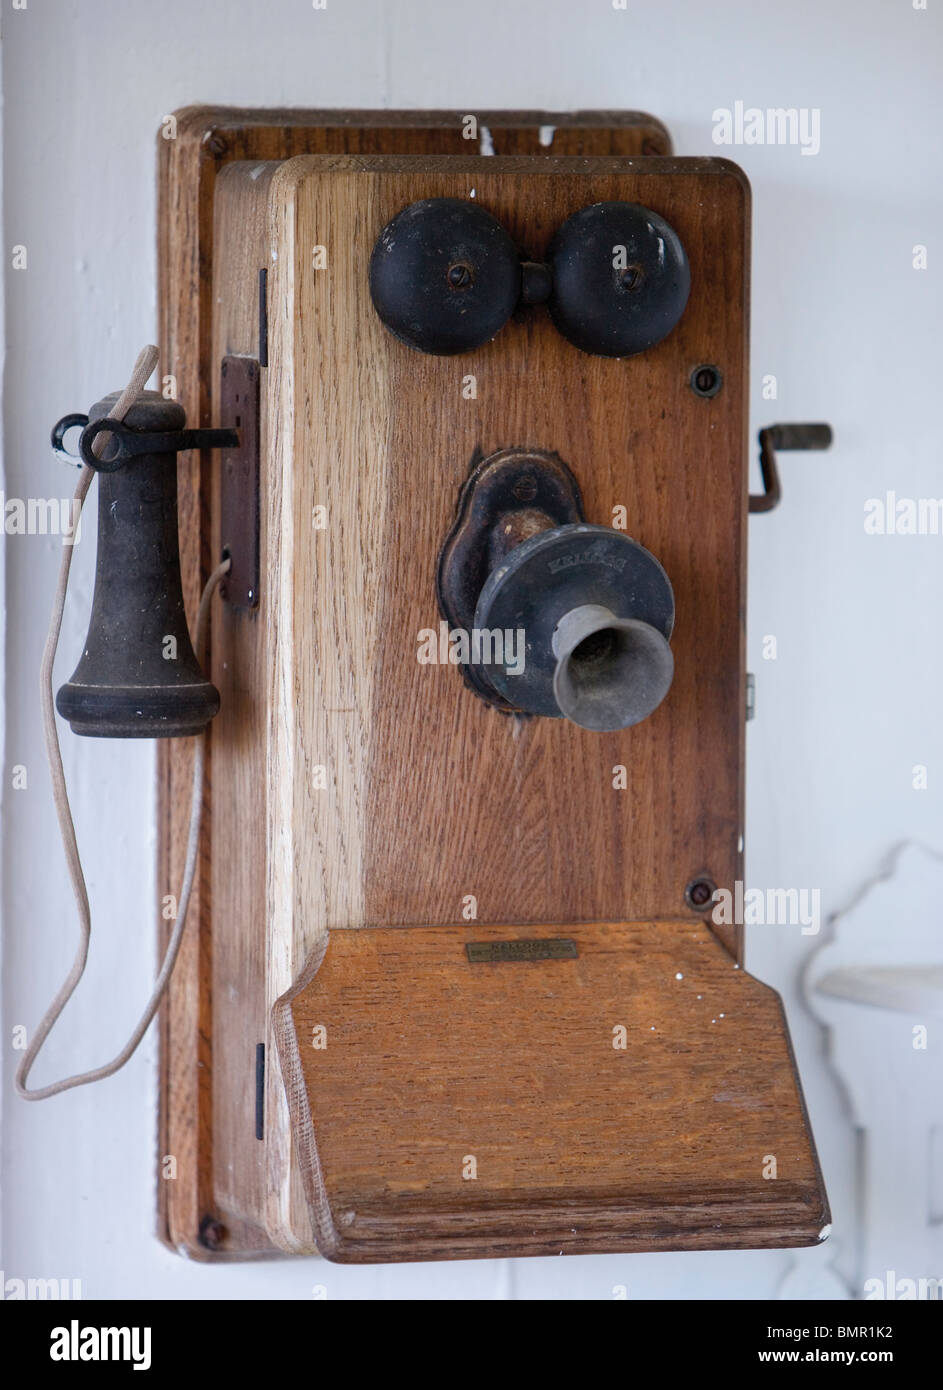 Old crank telephone at ranch in Hawaii Stock Photo